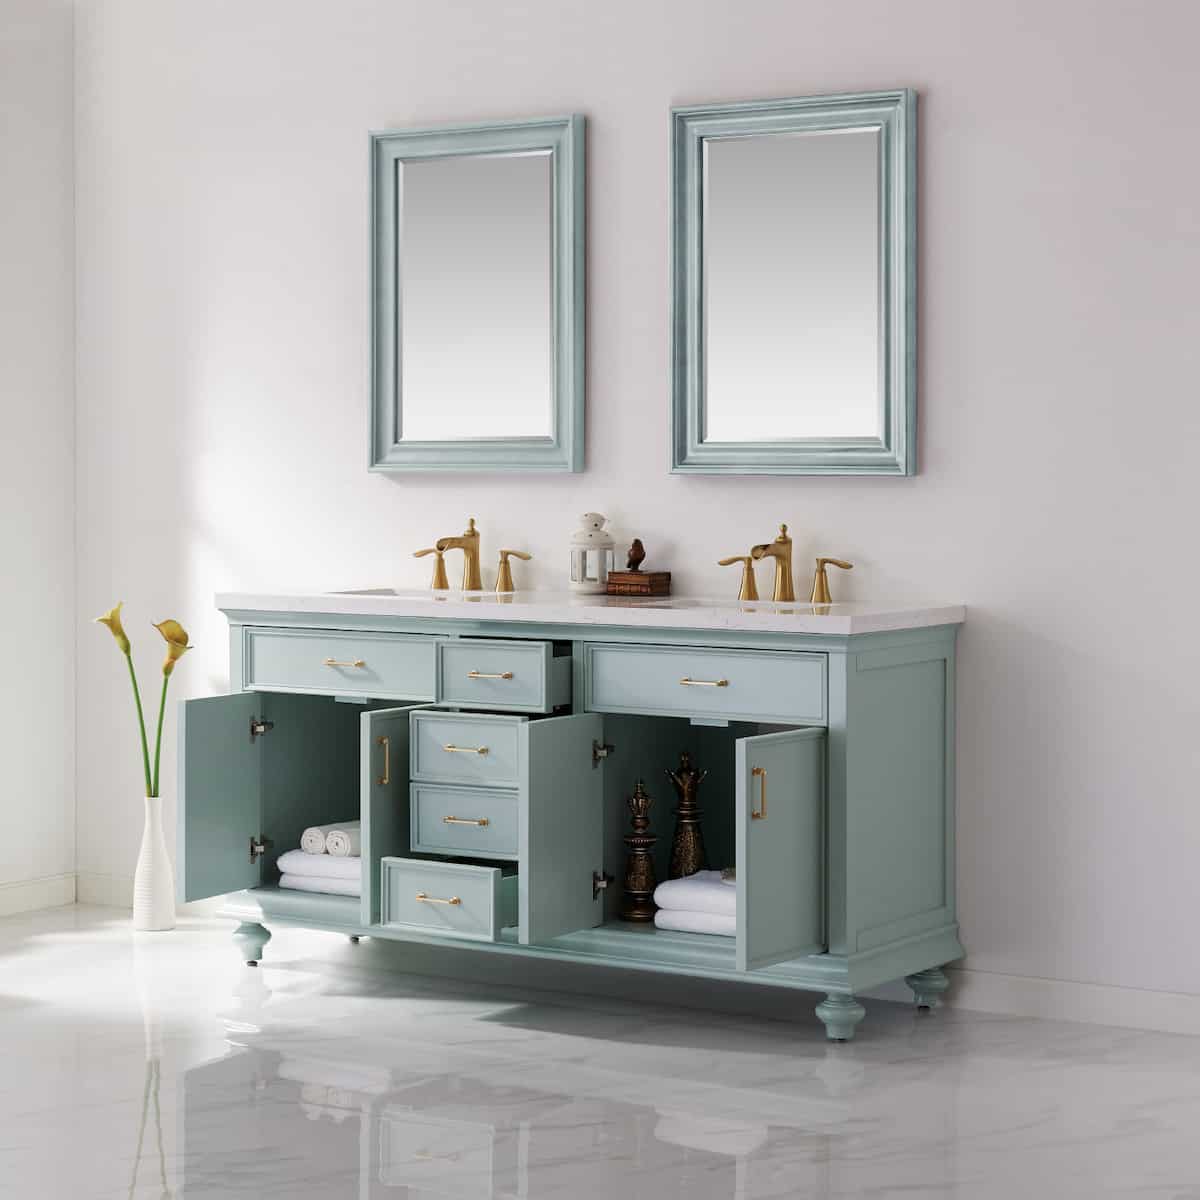 Vinnova Charlotte 72 Inch Finnish Green Freestanding Double Vanity with Carrara White Composite Stone Countertop With Mirror Inside 735072-FG-CQS